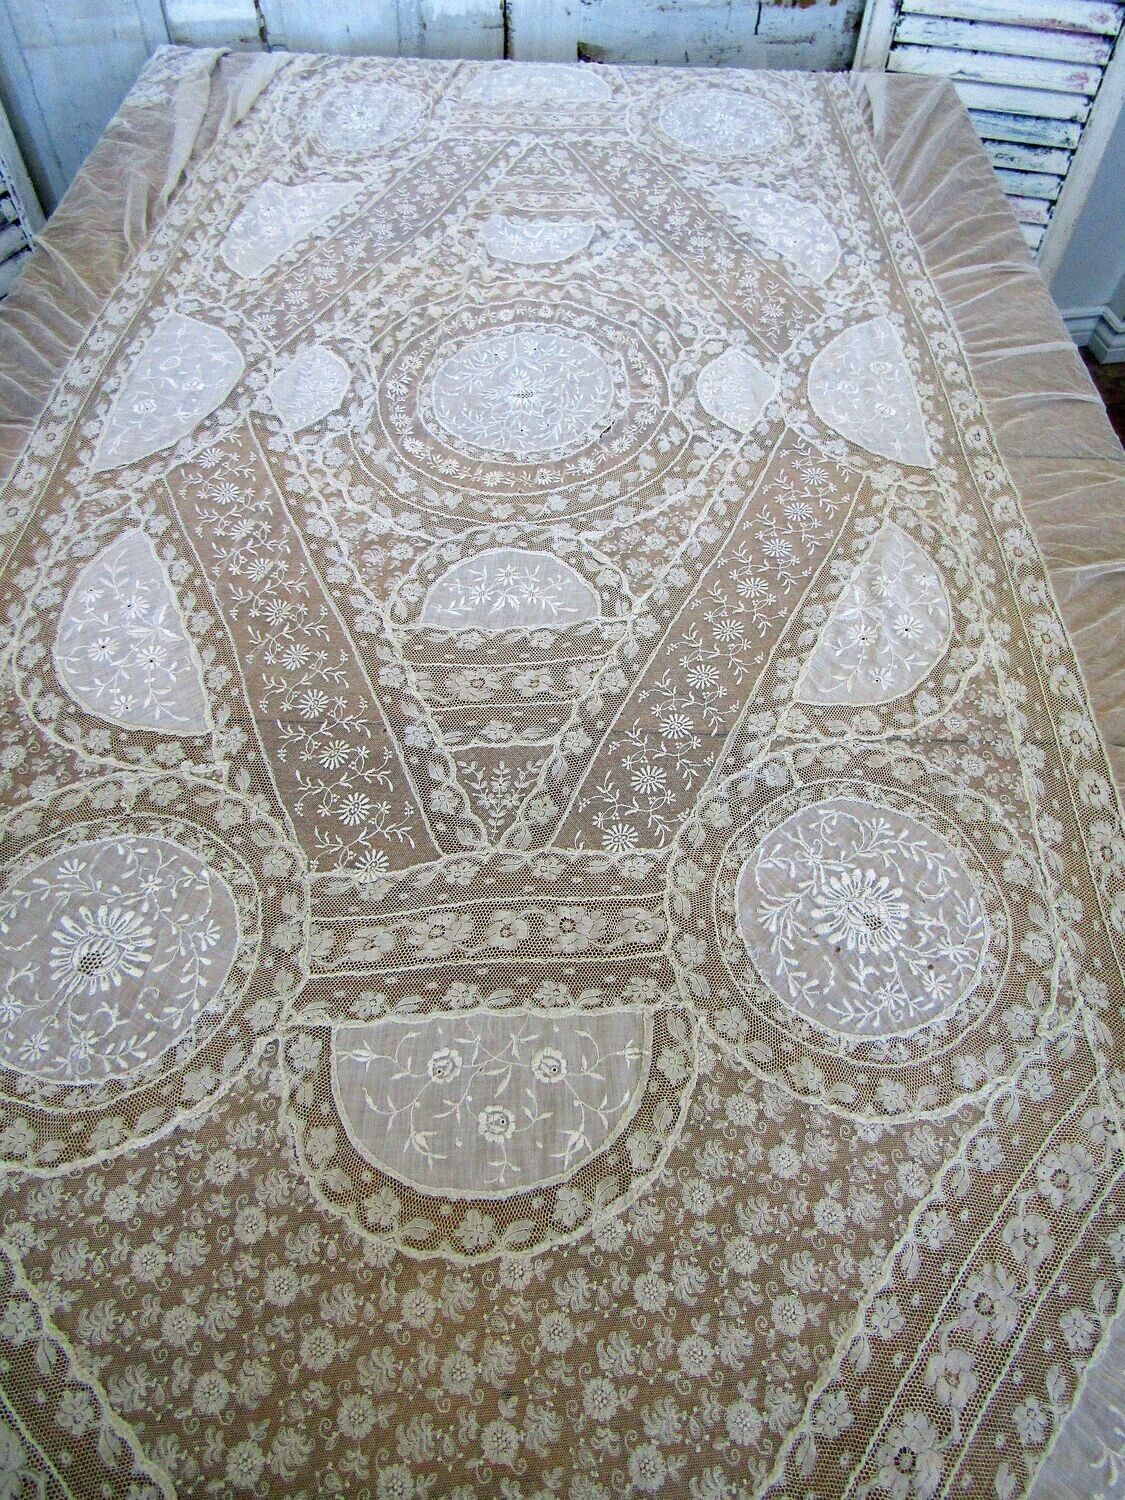 Normandy Tambour lace antique tablecloth runner handmade